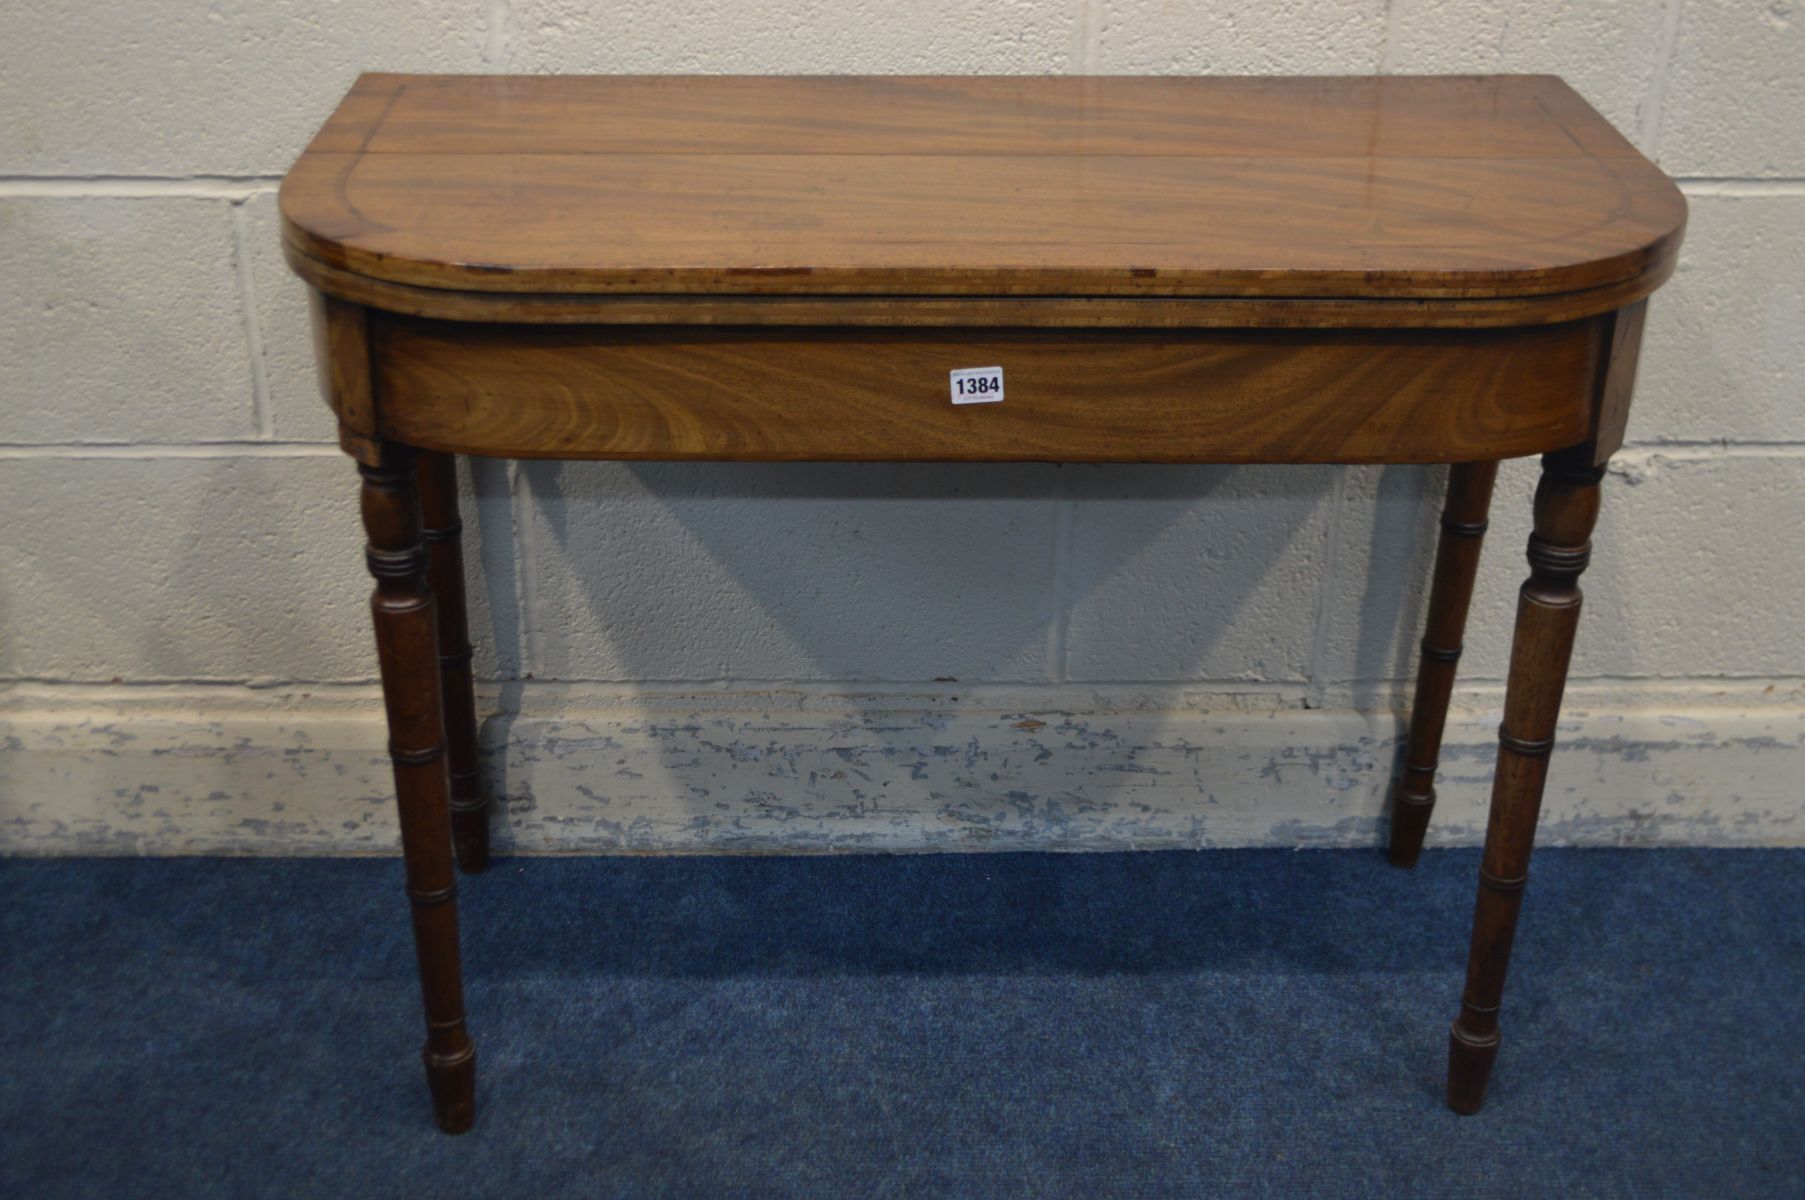 A GEORGIAN MAHOGANY CARD TABLE, the fold over top with a green baize lining, on turned legs, width